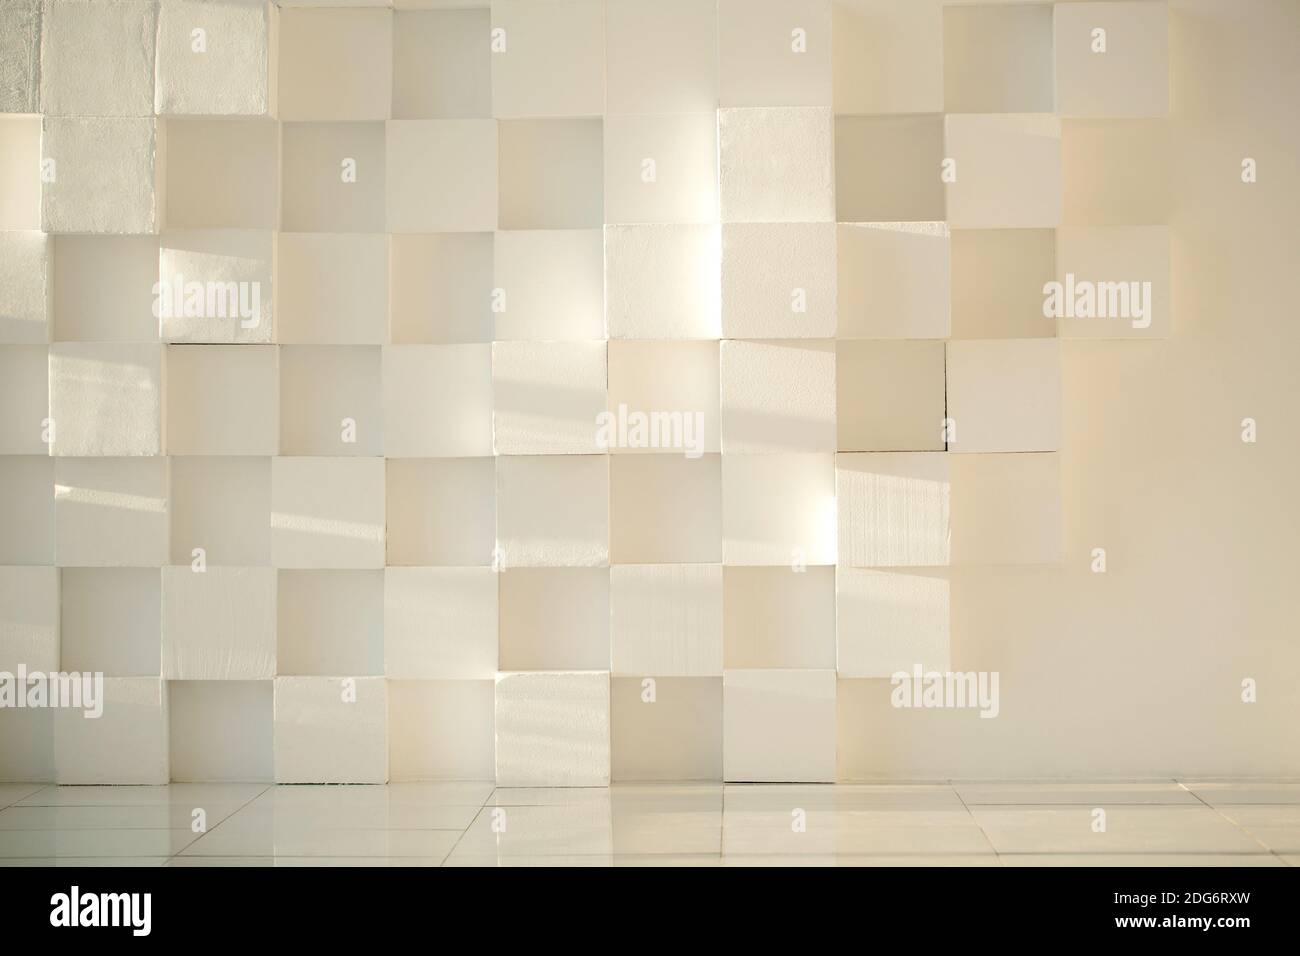 White painted concrete wall made of cubes with tiled floor Stock Photo